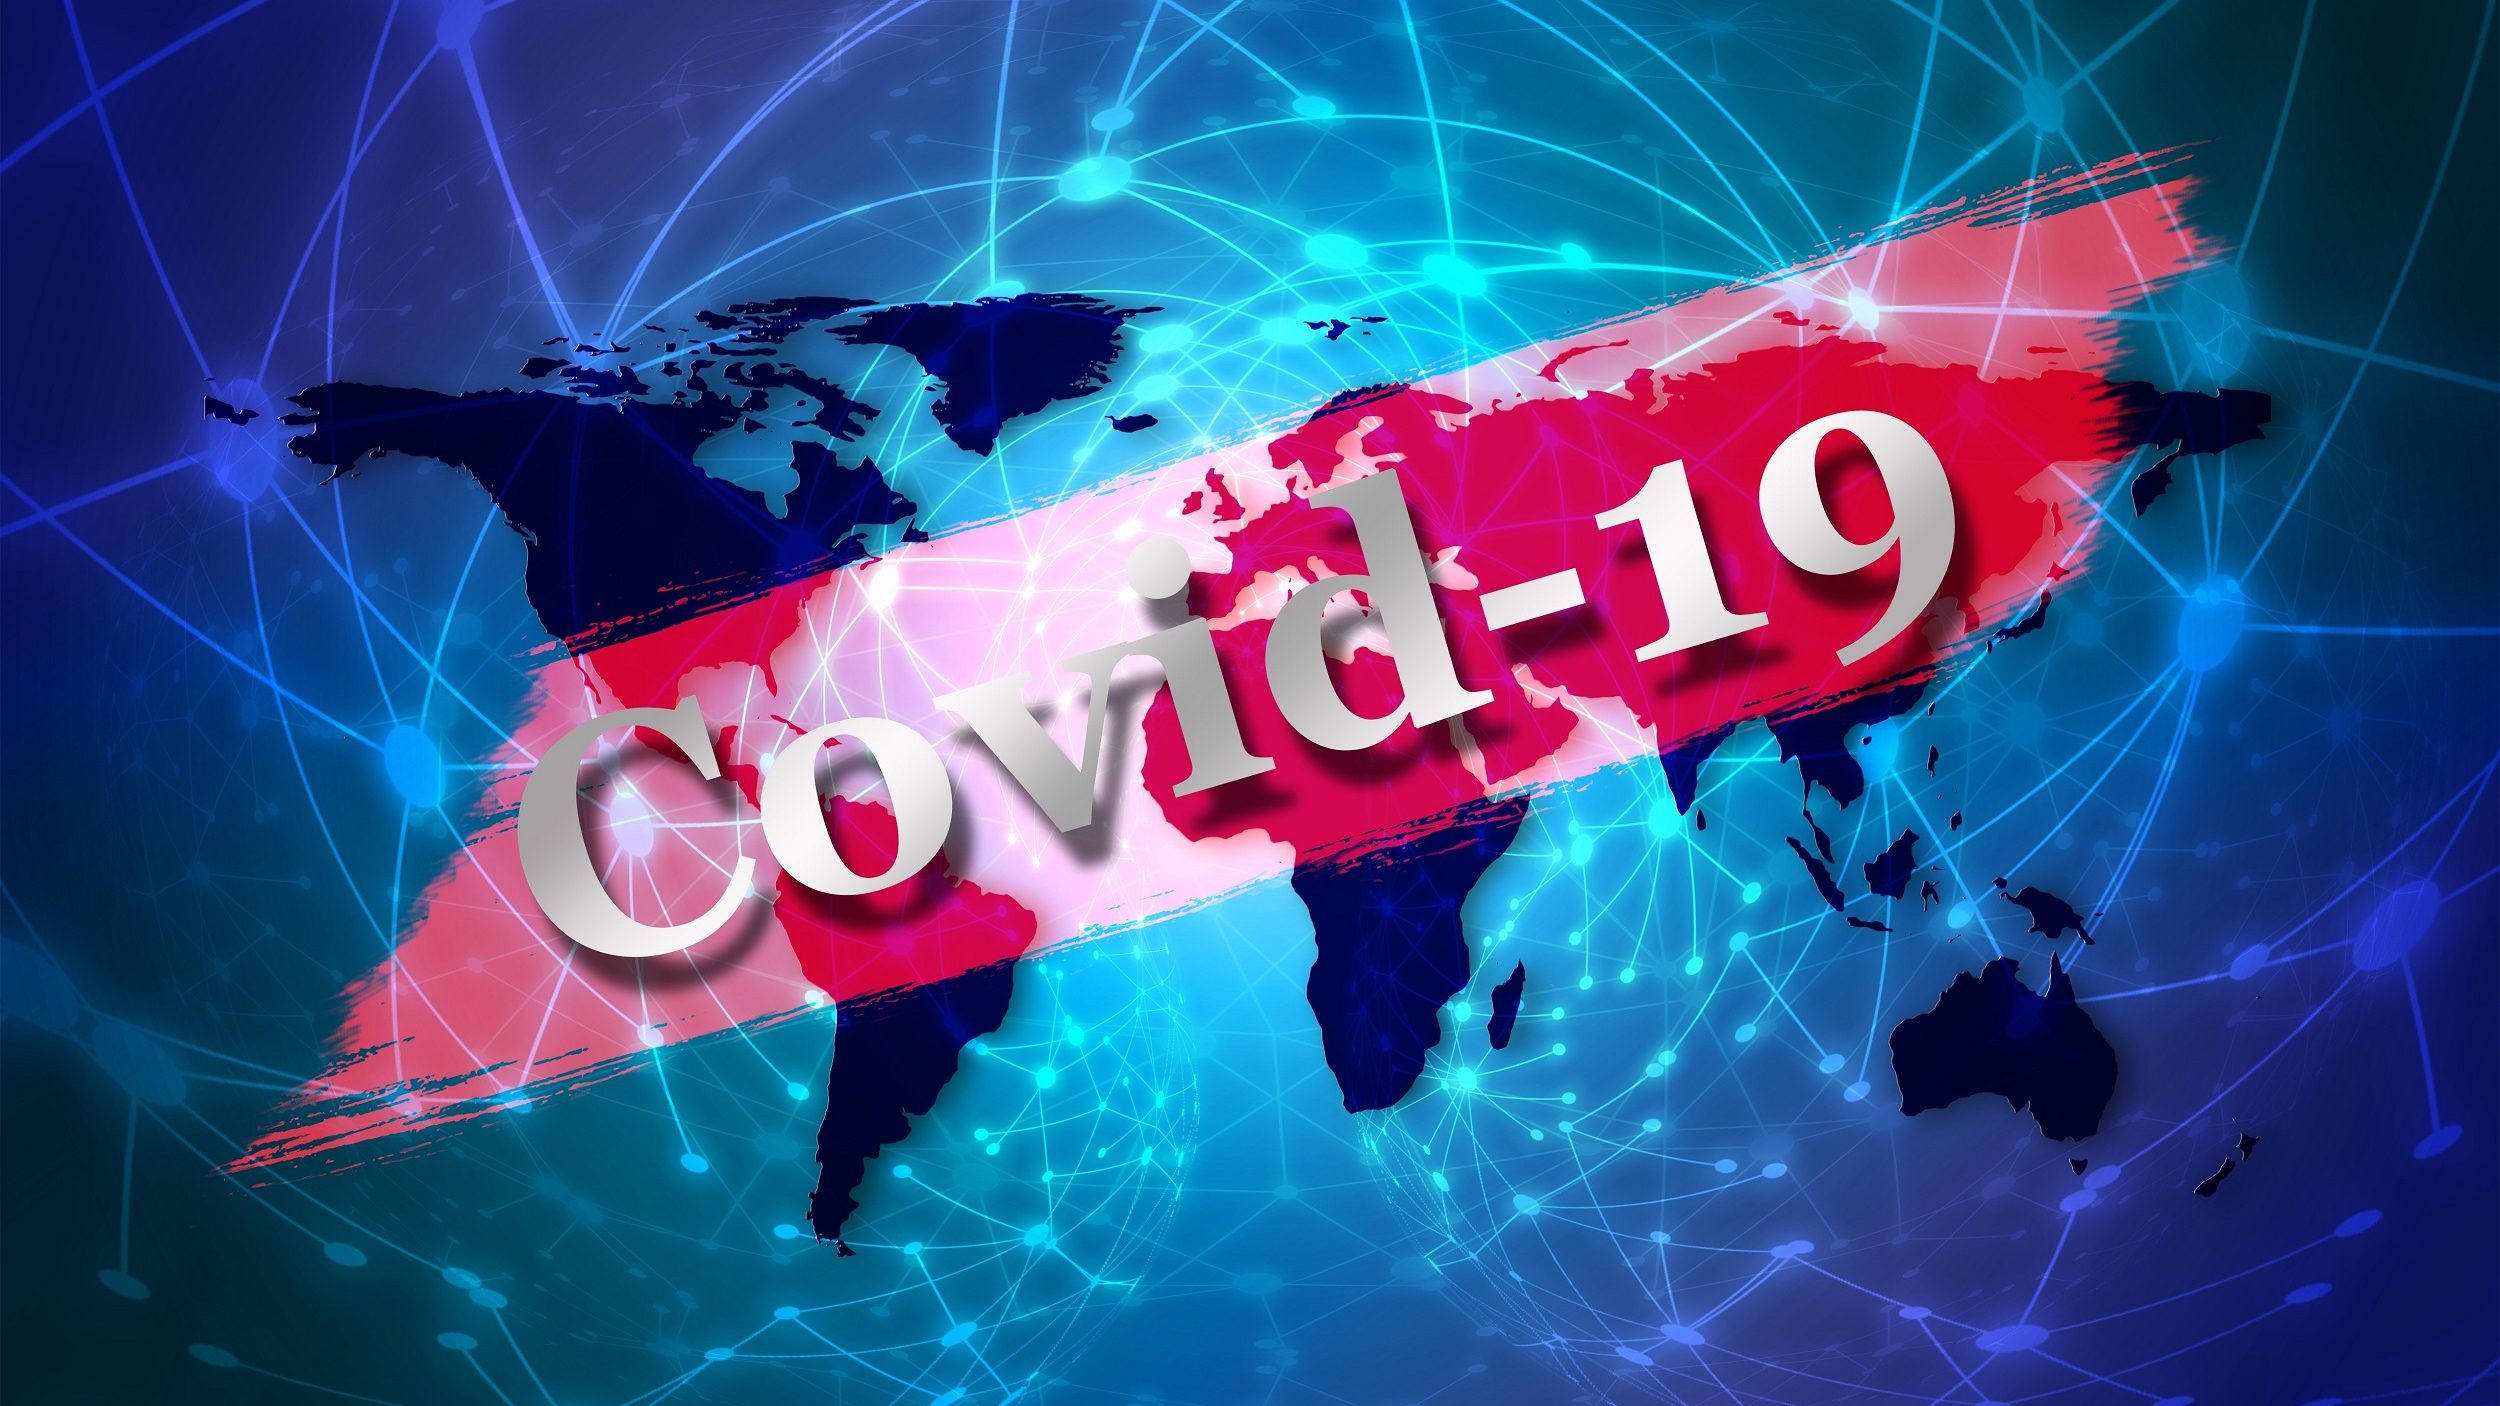 The Future of Travel: Where Will People Fly After COVID-19 Is Brought Under Control?